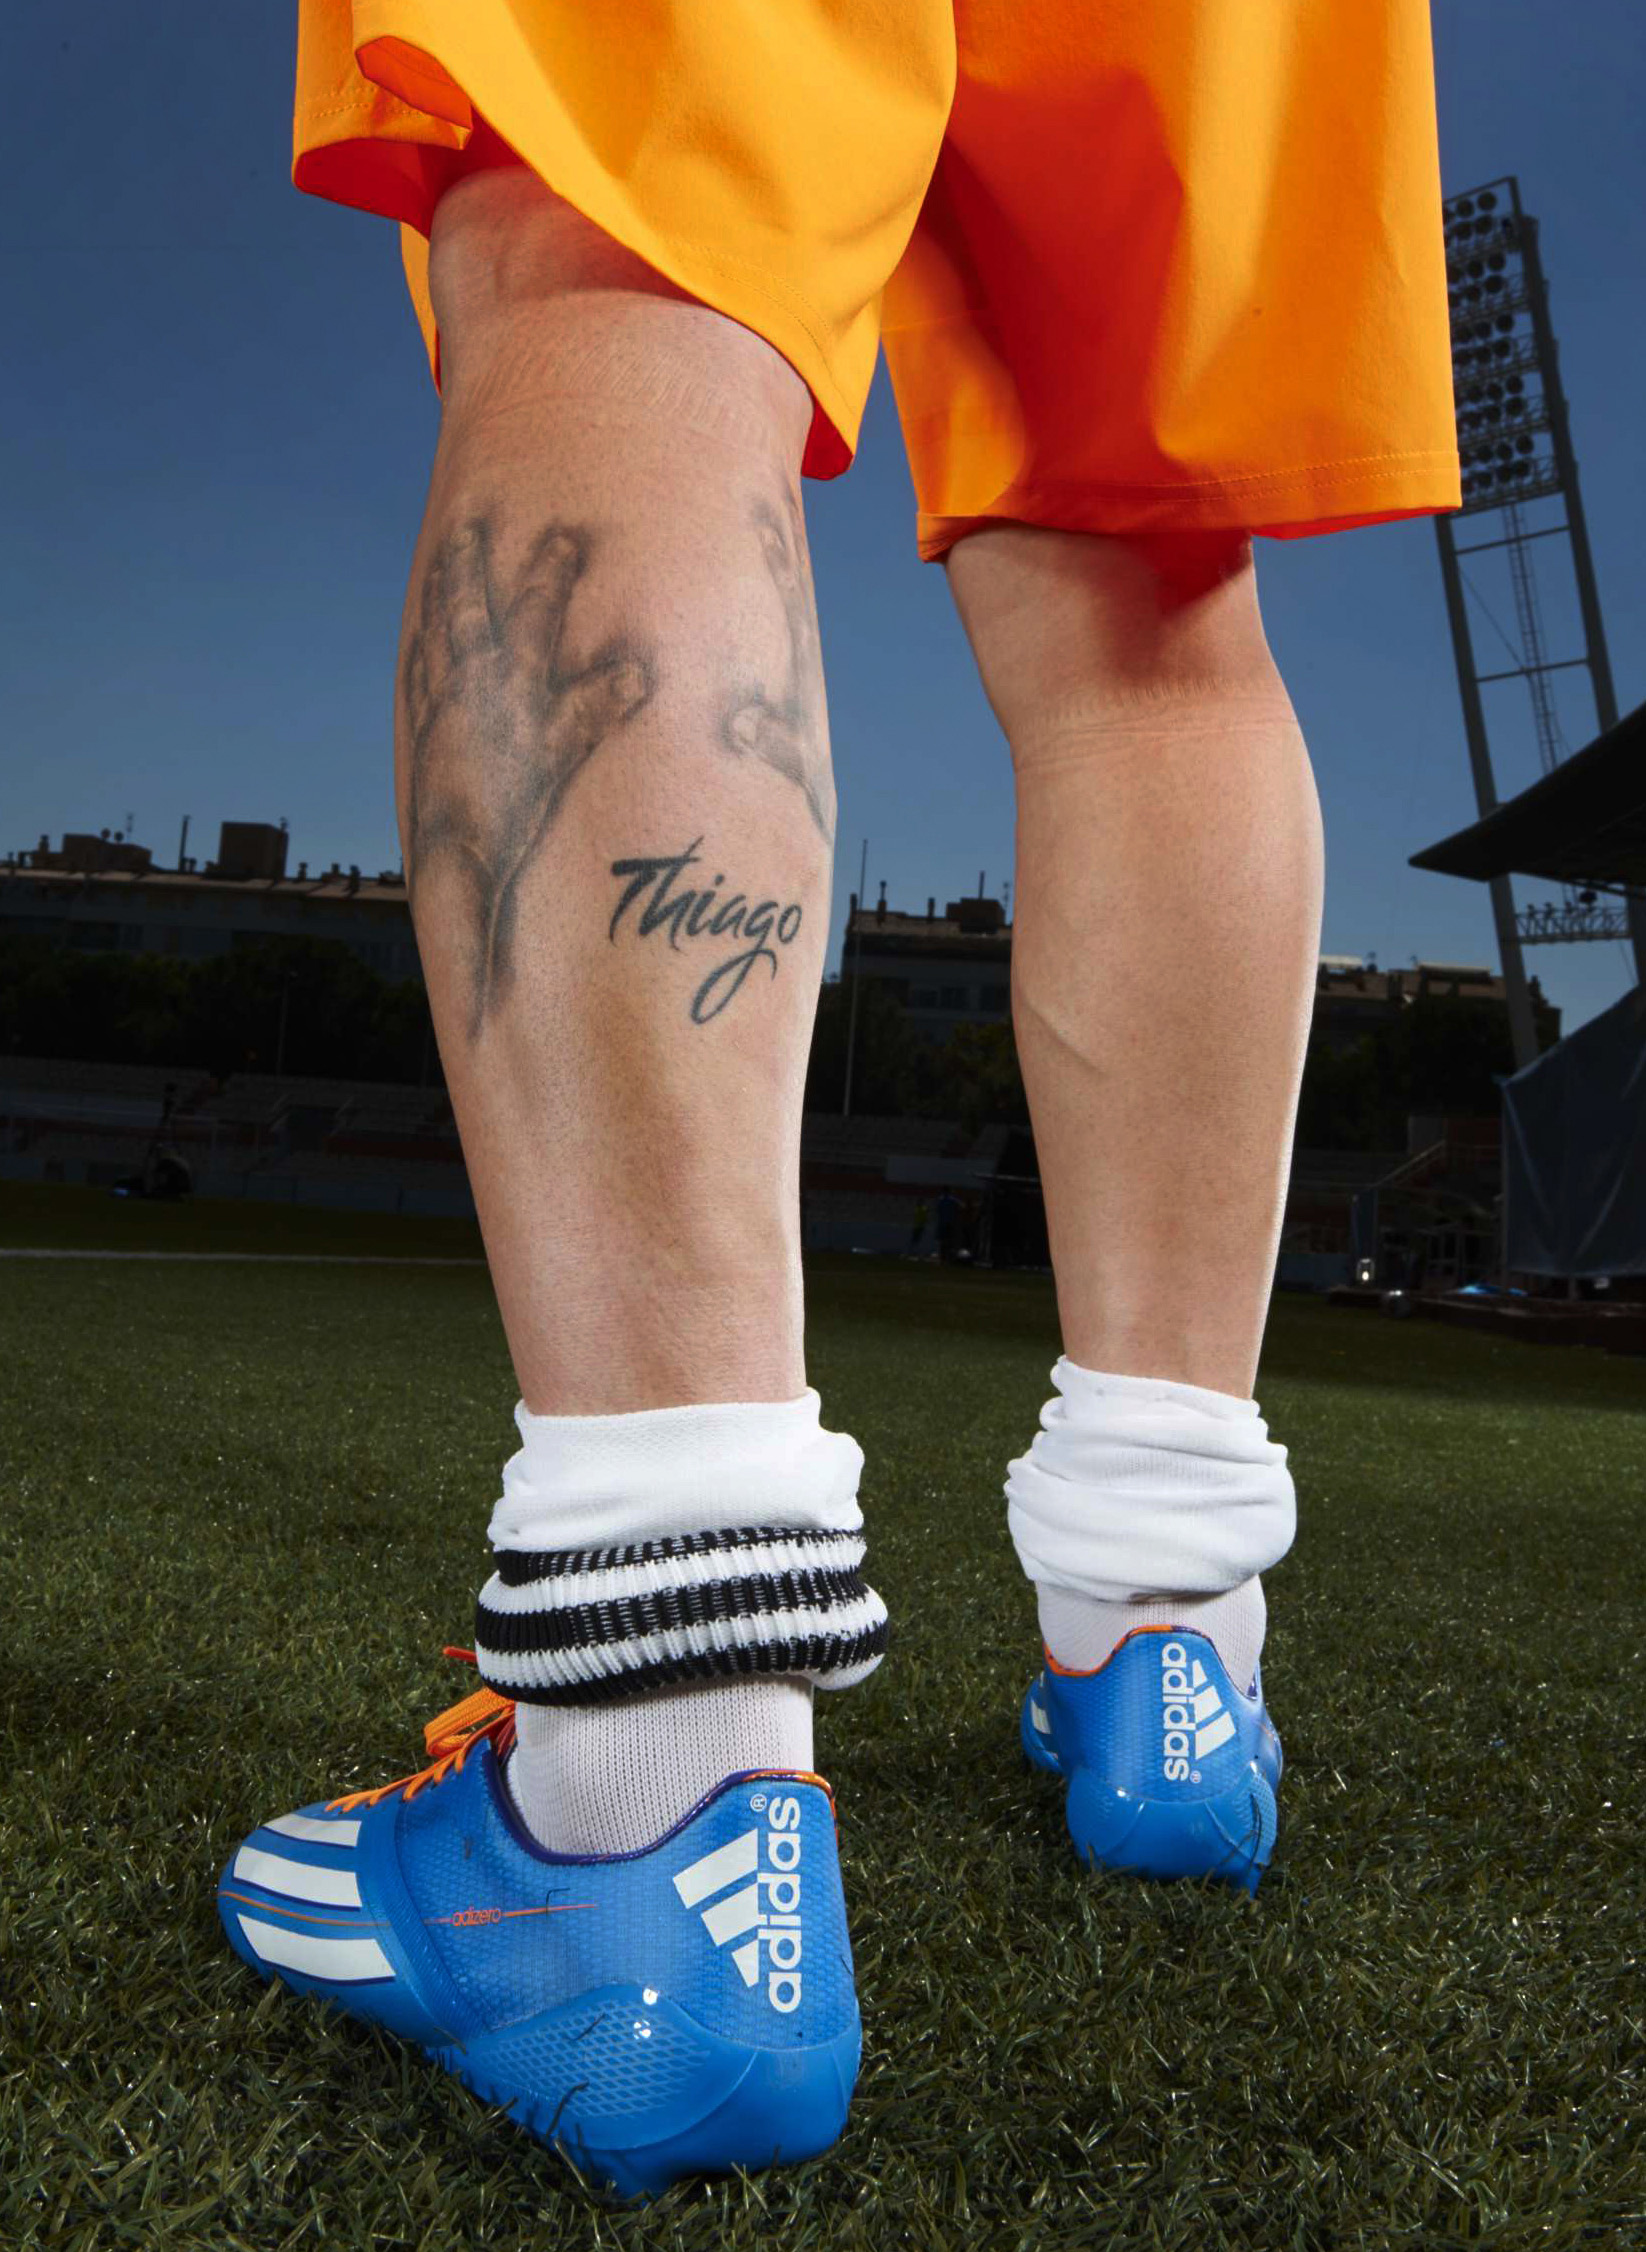 Lionel Messi for adidas